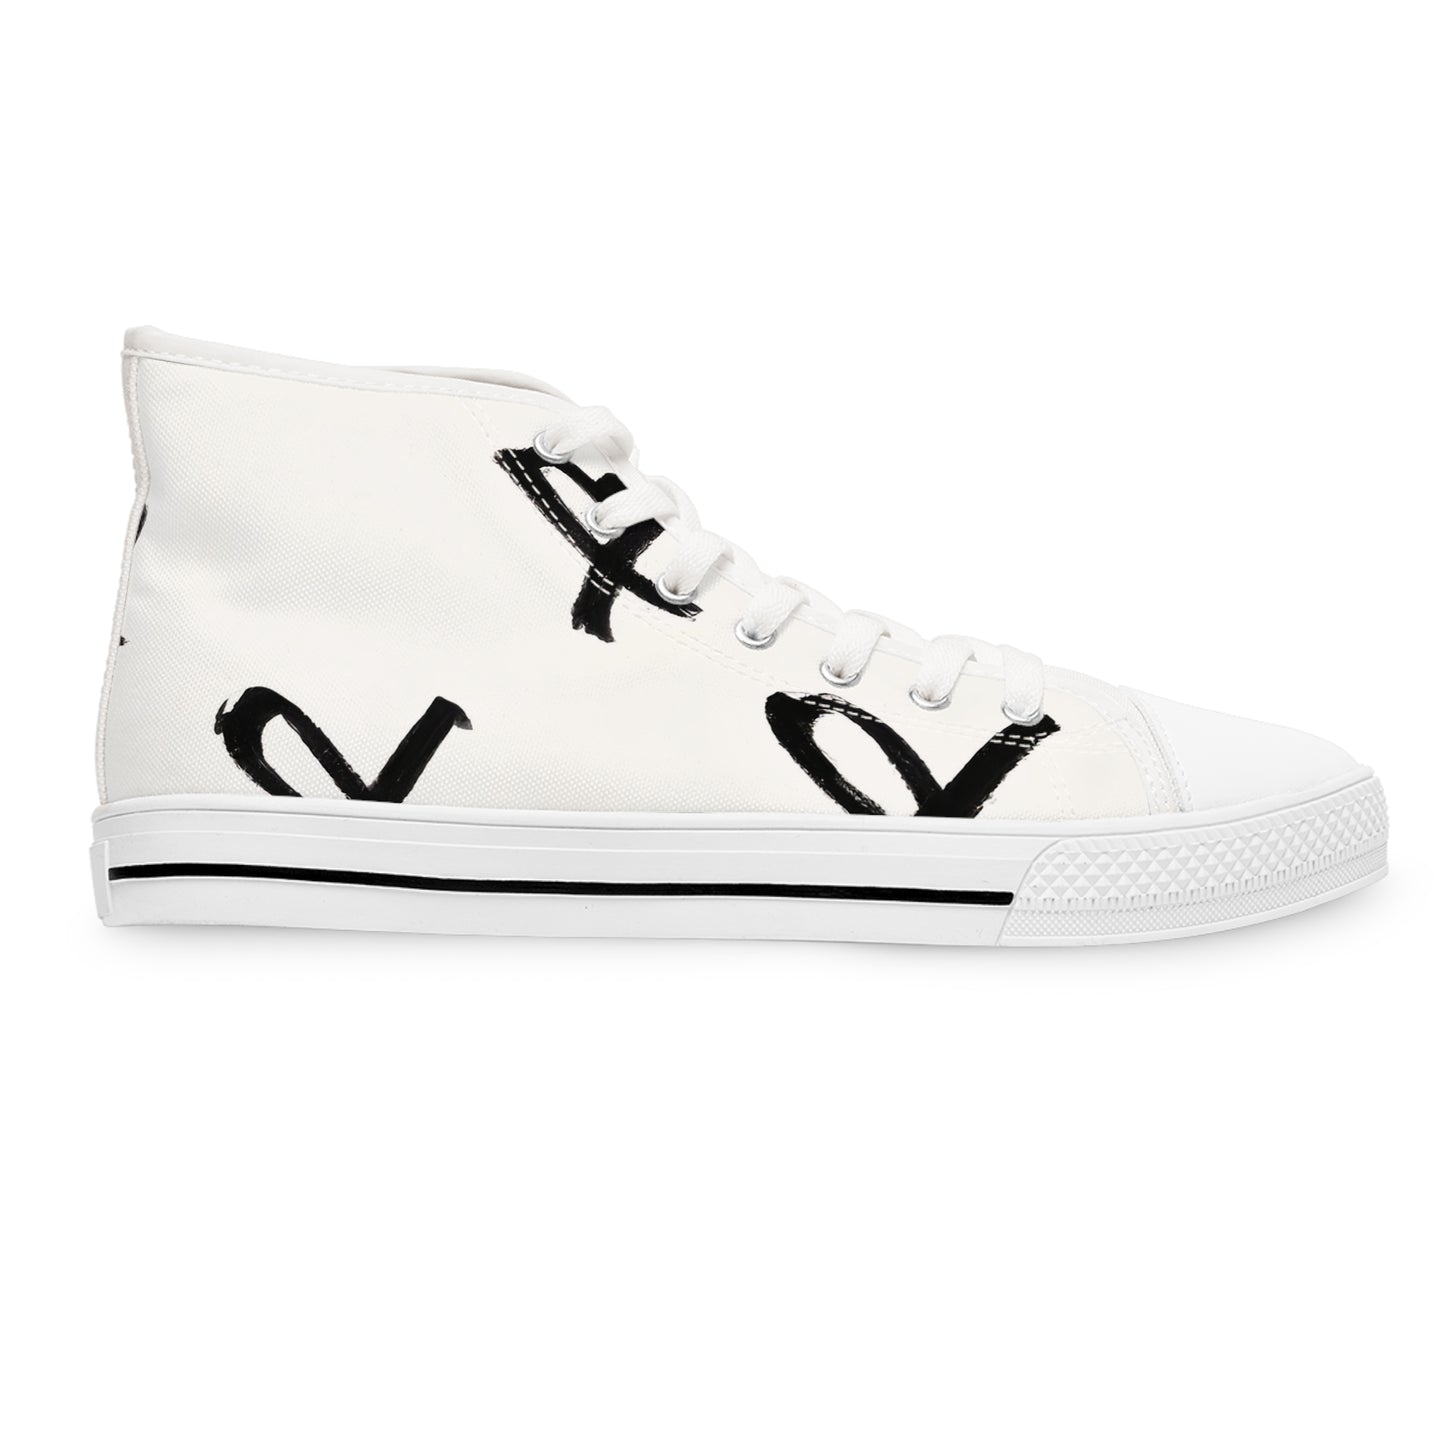 Cion Evelyn - Women's High-Top Sneakers